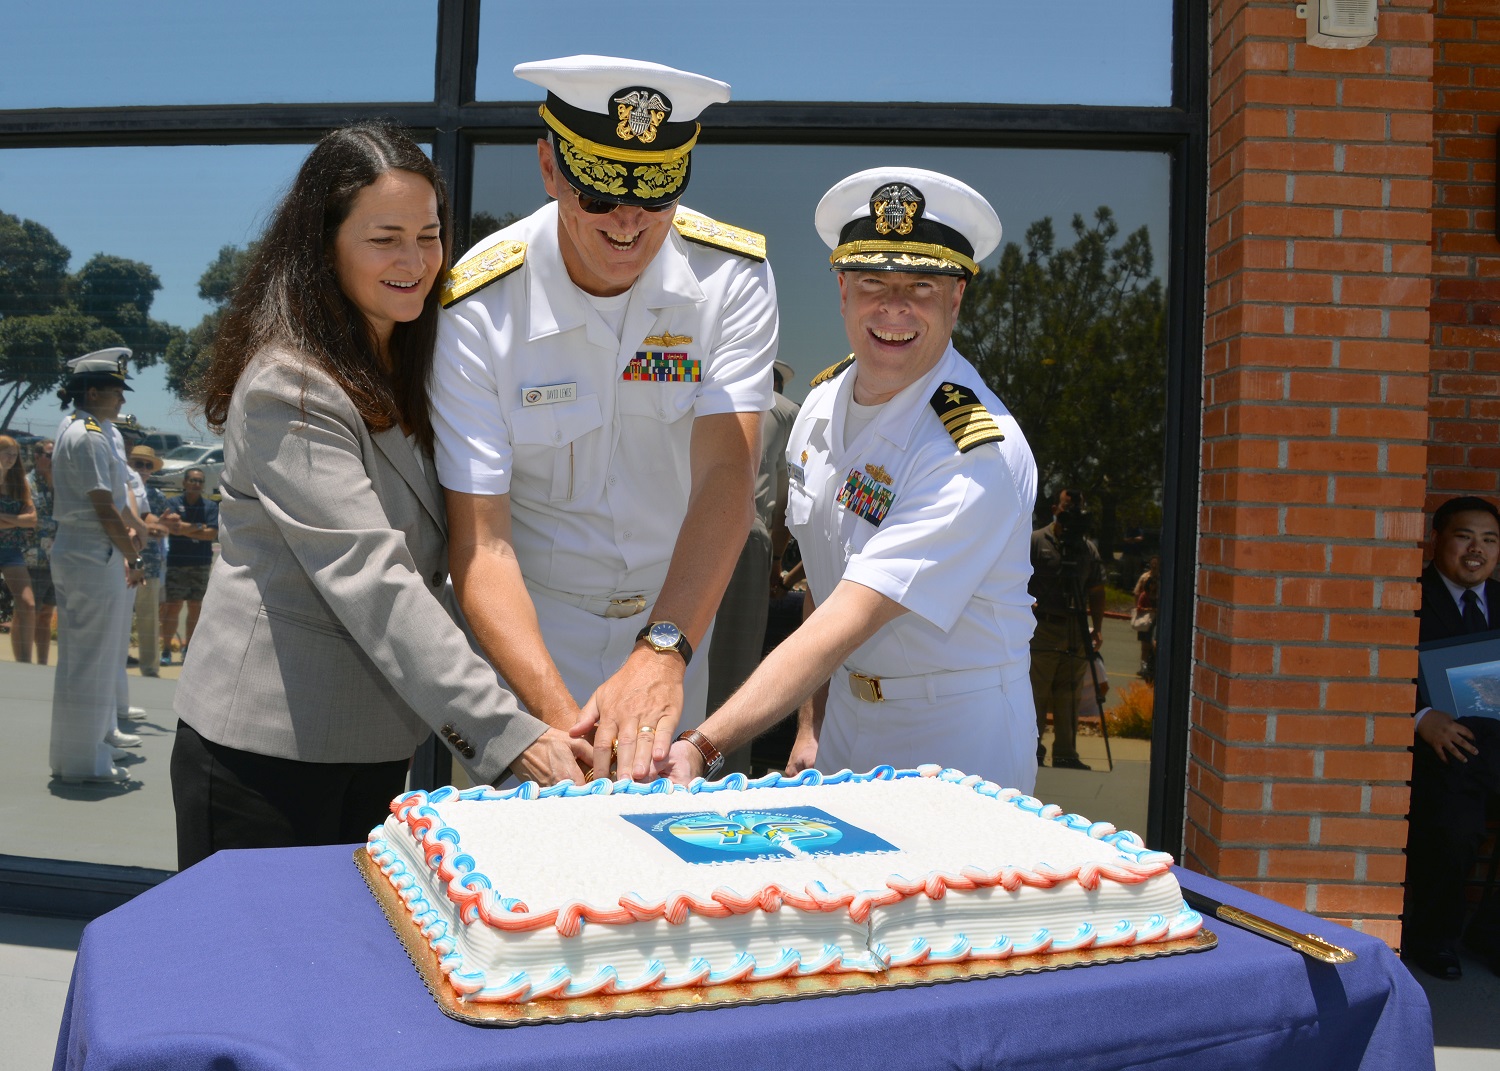 SAN DIEGO (June 6, 2015) SSC Pacific Executive Director Carmela Keeney, SPAWAR Commander Rear Adm. Dave Lewis, and SSC Pacific Commanding Officer Capt. Kurt Rothenhaus cut a ceremonial cake during events celebrating SSC Pacific's 75th Anniversary Open House. SSC Pacific celebrated its 75th anniversary by opening its facilities for demonstrations and site tours. U.S. Navy photo by Chief Mass Communication Specialist Ryan Valverde.